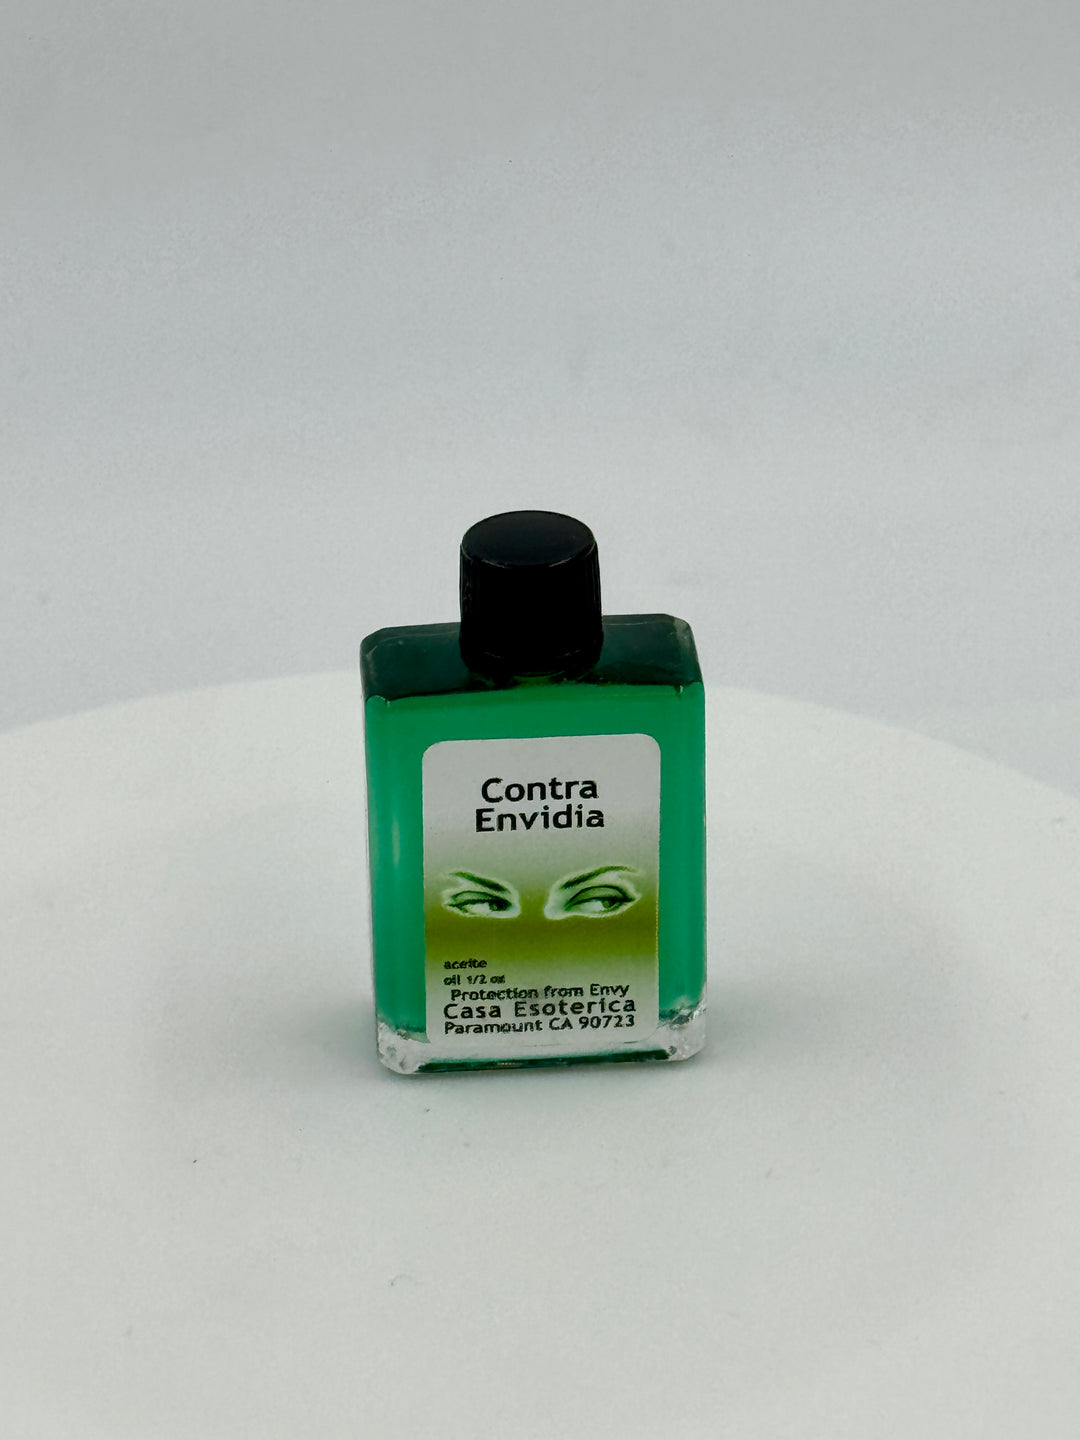 PROTECTION FROM ENVY (CONTRA ENVIDIA) -Oil/Aceite